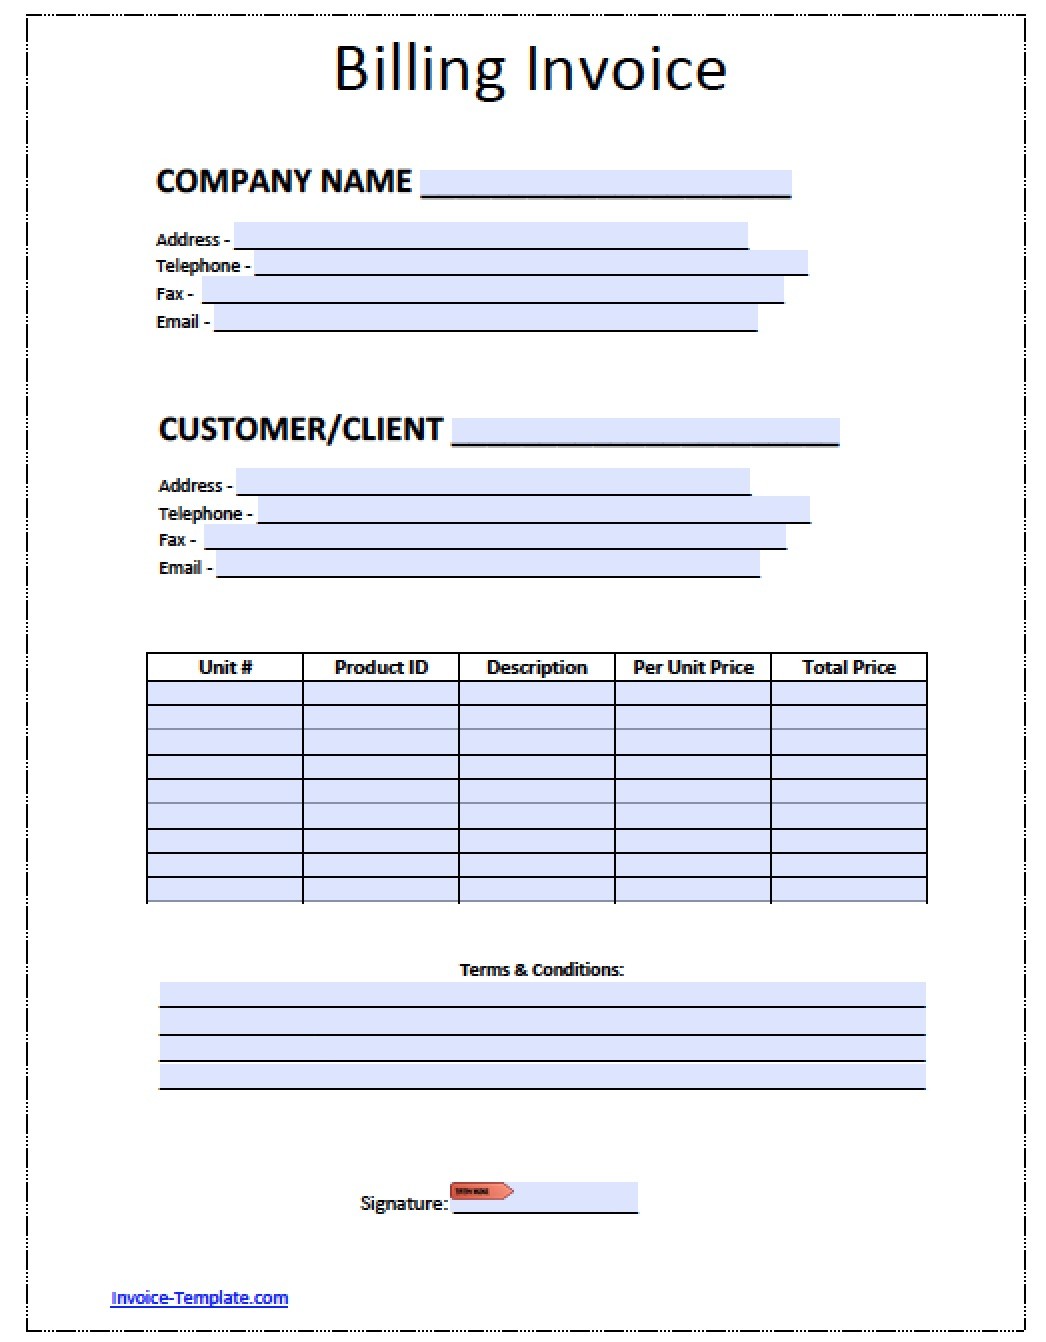 Free Blank Invoice S In PDF Word Excel Document Plain